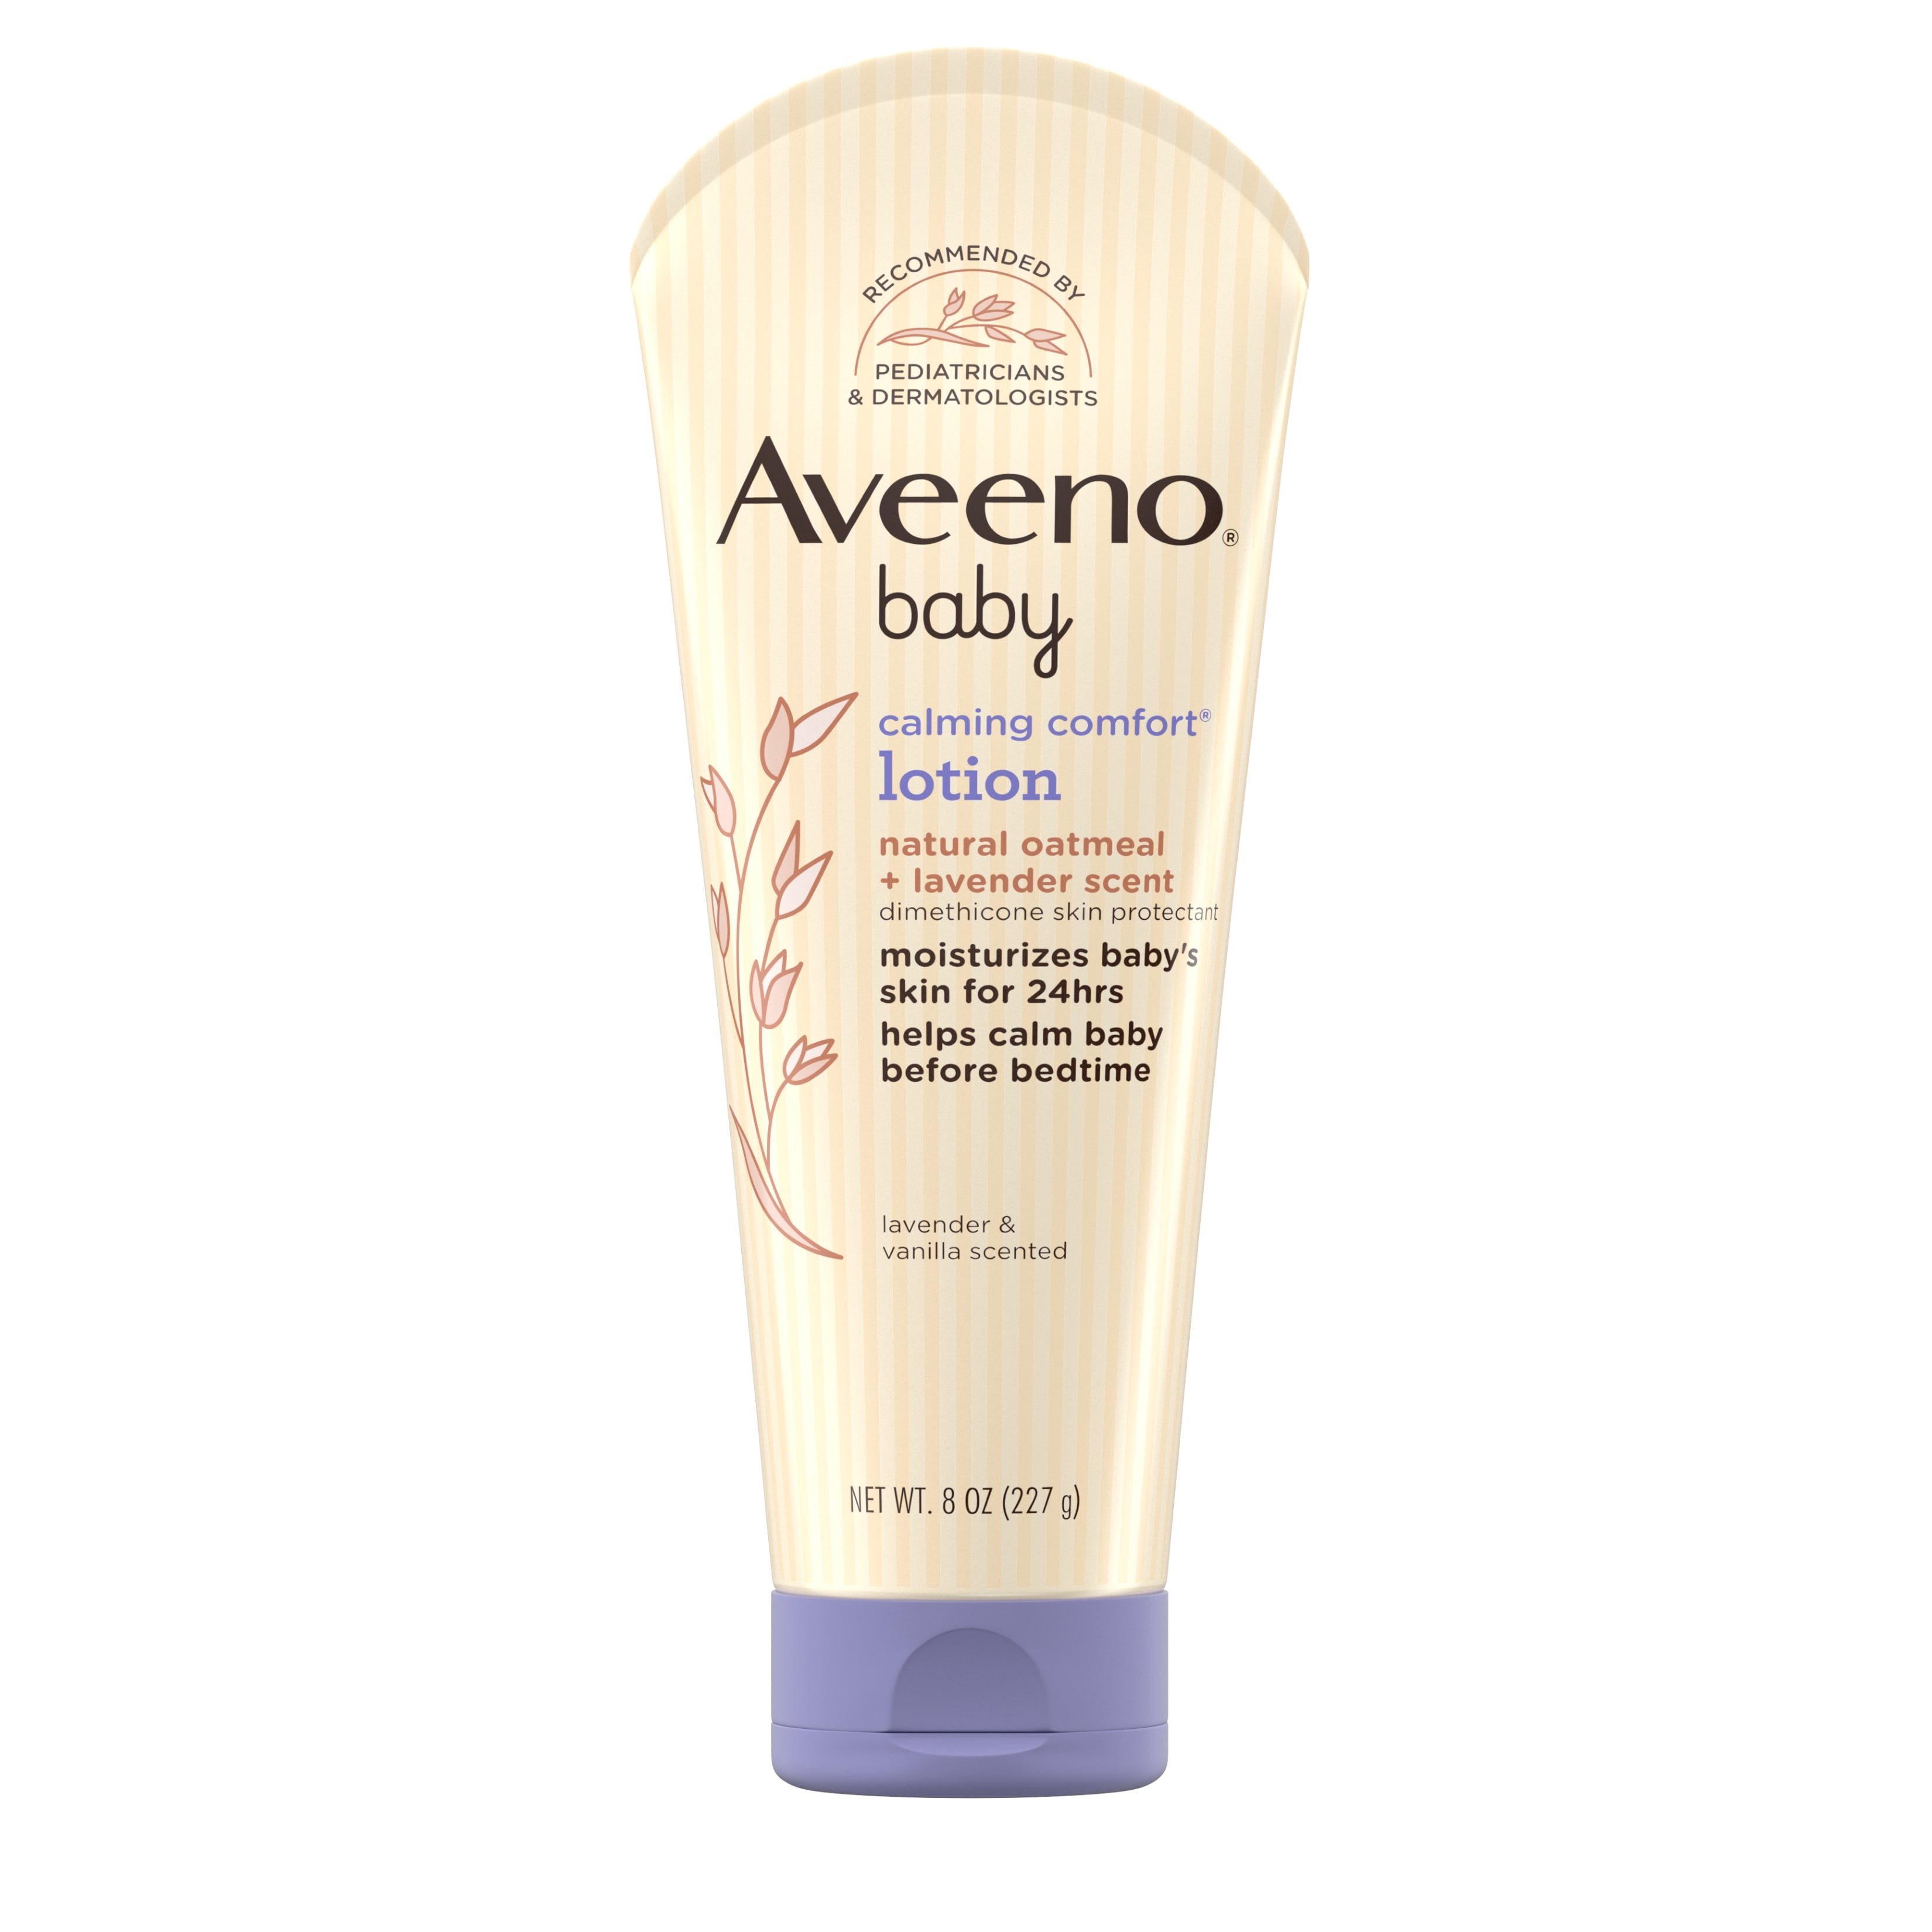 Aveeno Baby Calming Comfort Body Lotion with Natural Oatmeal and Lavender Scent